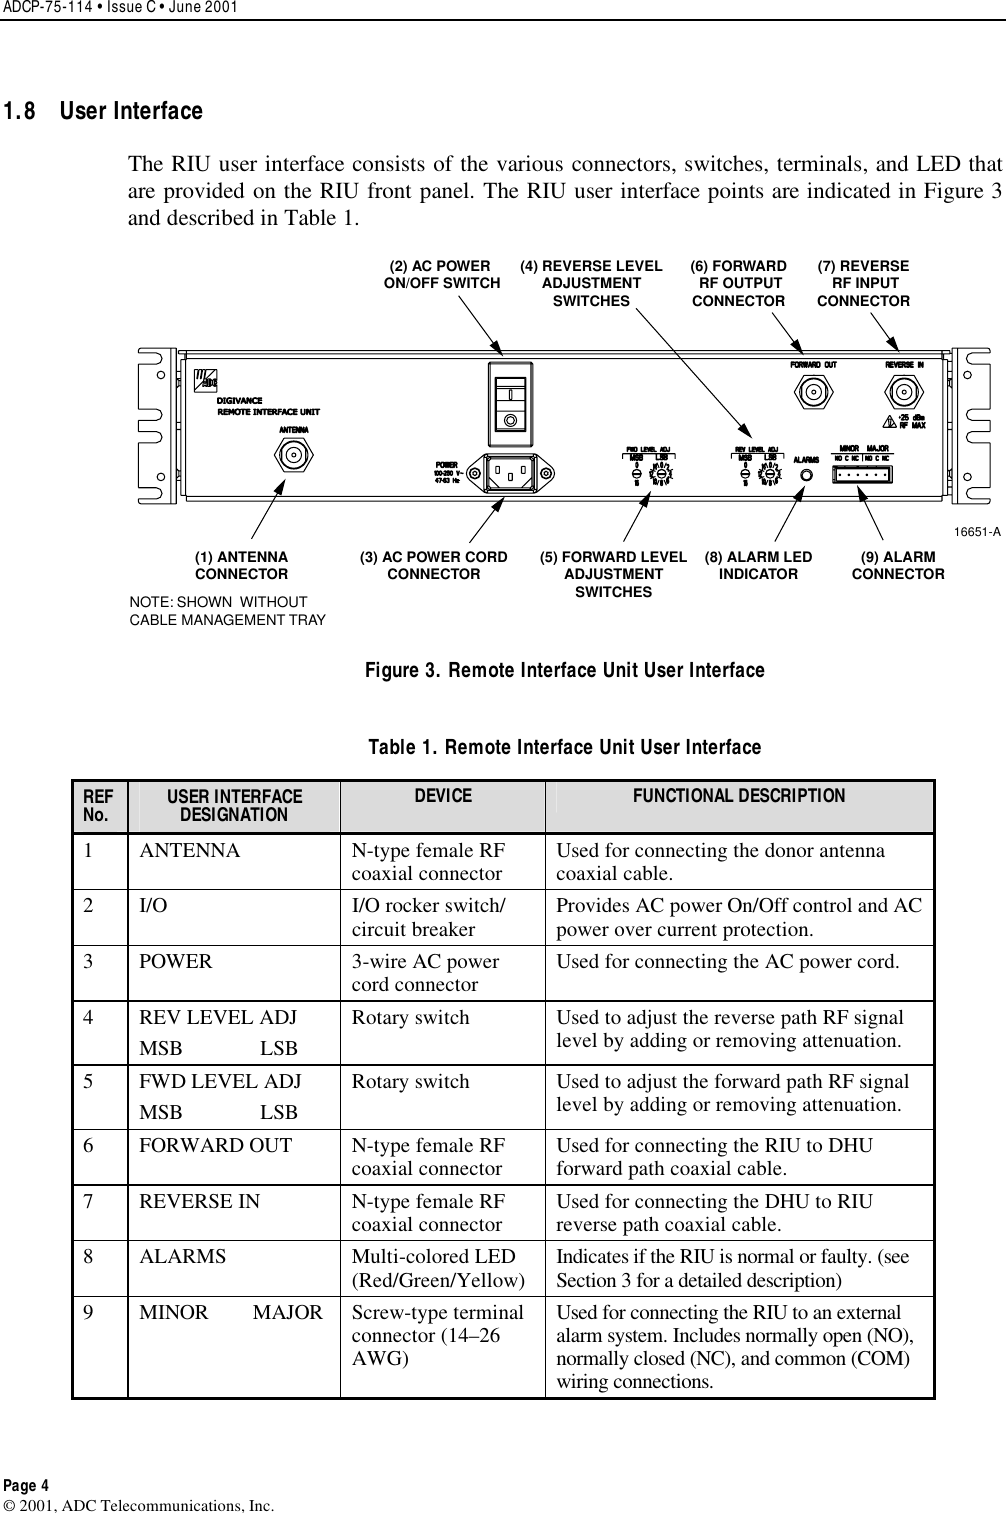 ADCP-75-114 • Issue C • June 2001 Page 4 ©2001, ADC Telecommunications, Inc.1.8 User Interface The RIU user interface consists of the various connectors, switches, terminals, and LED thatare provided on the RIU front panel. The RIU user interface points are indicated in Figure 3and described in Table 1.NOTE: SHOWN  WITHOUTCABLE MANAGEMENT TRAY(3) AC POWER CORDCONNECTOR (8) ALARM LEDINDICATOR (9) ALARMCONNECTOR(1) ANTENNACONNECTOR (5) FORWARD LEVELADJUSTMENTSWITCHES(2) AC POWER ON/OFF SWITCH (6) FORWARD RF OUTPUTCONNECTOR(7) REVERSE RF INPUTCONNECTOR(4) REVERSE LEVELADJUSTMENTSWITCHES16651-AFigure 3. Remote Interface Unit User Interface Table 1. Remote Interface Unit User Interface REFNo.  USER INTERFACE DESIGNATION  DEVICE  FUNCTIONAL DESCRIPTION 1ANTENNA N-type female RFcoaxial connector Used for connecting the donor antennacoaxial cable.2I/O I/O rocker switch/circuit breaker Provides AC power On/Off control and ACpower over current protection.3POWER 3-wire AC powercord connector Used for connecting the AC power cord.4REV LEVEL ADJMSB LSBRotary switch Used to adjust the reverse path RF signallevel by adding or removing attenuation.5FWD LEVEL ADJMSB LSBRotary switch Used to adjust the forward path RF signallevel by adding or removing attenuation.6FORWARD OUT N-type female RFcoaxial connector Used for connecting the RIU to DHUforward path coaxial cable.7REVERSE IN N-type female RFcoaxial connector Used for connecting the DHU to RIUreverse path coaxial cable.8ALARMS Multi-colored LED(Red/Green/Yellow) Indicates if the RIU is normal or faulty. (seeSection 3for adetailed description)9MINOR MAJOR Screw-type terminalconnector (14–26AWG)Used for connecting the RIU to an externalalarm system. Includes normally open (NO),normally closed (NC), and common (COM)wiring connections.